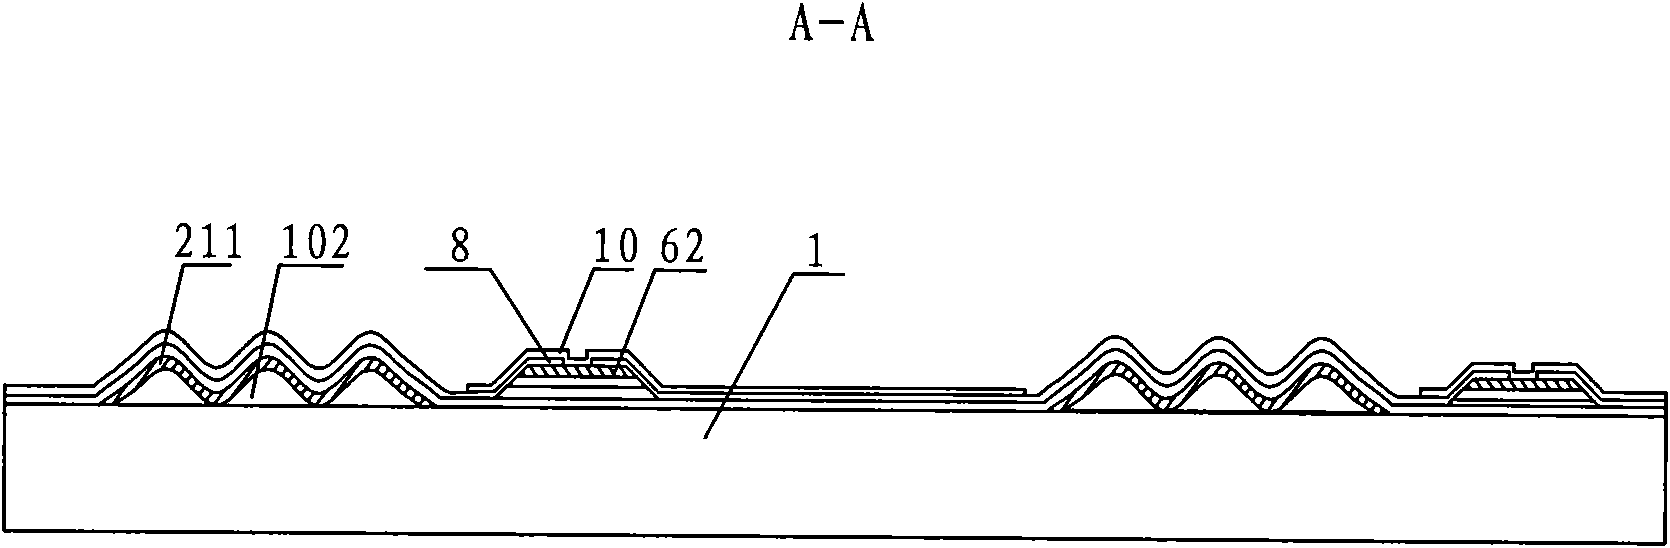 TFT-LCD array substrate structure and preparation method thereof